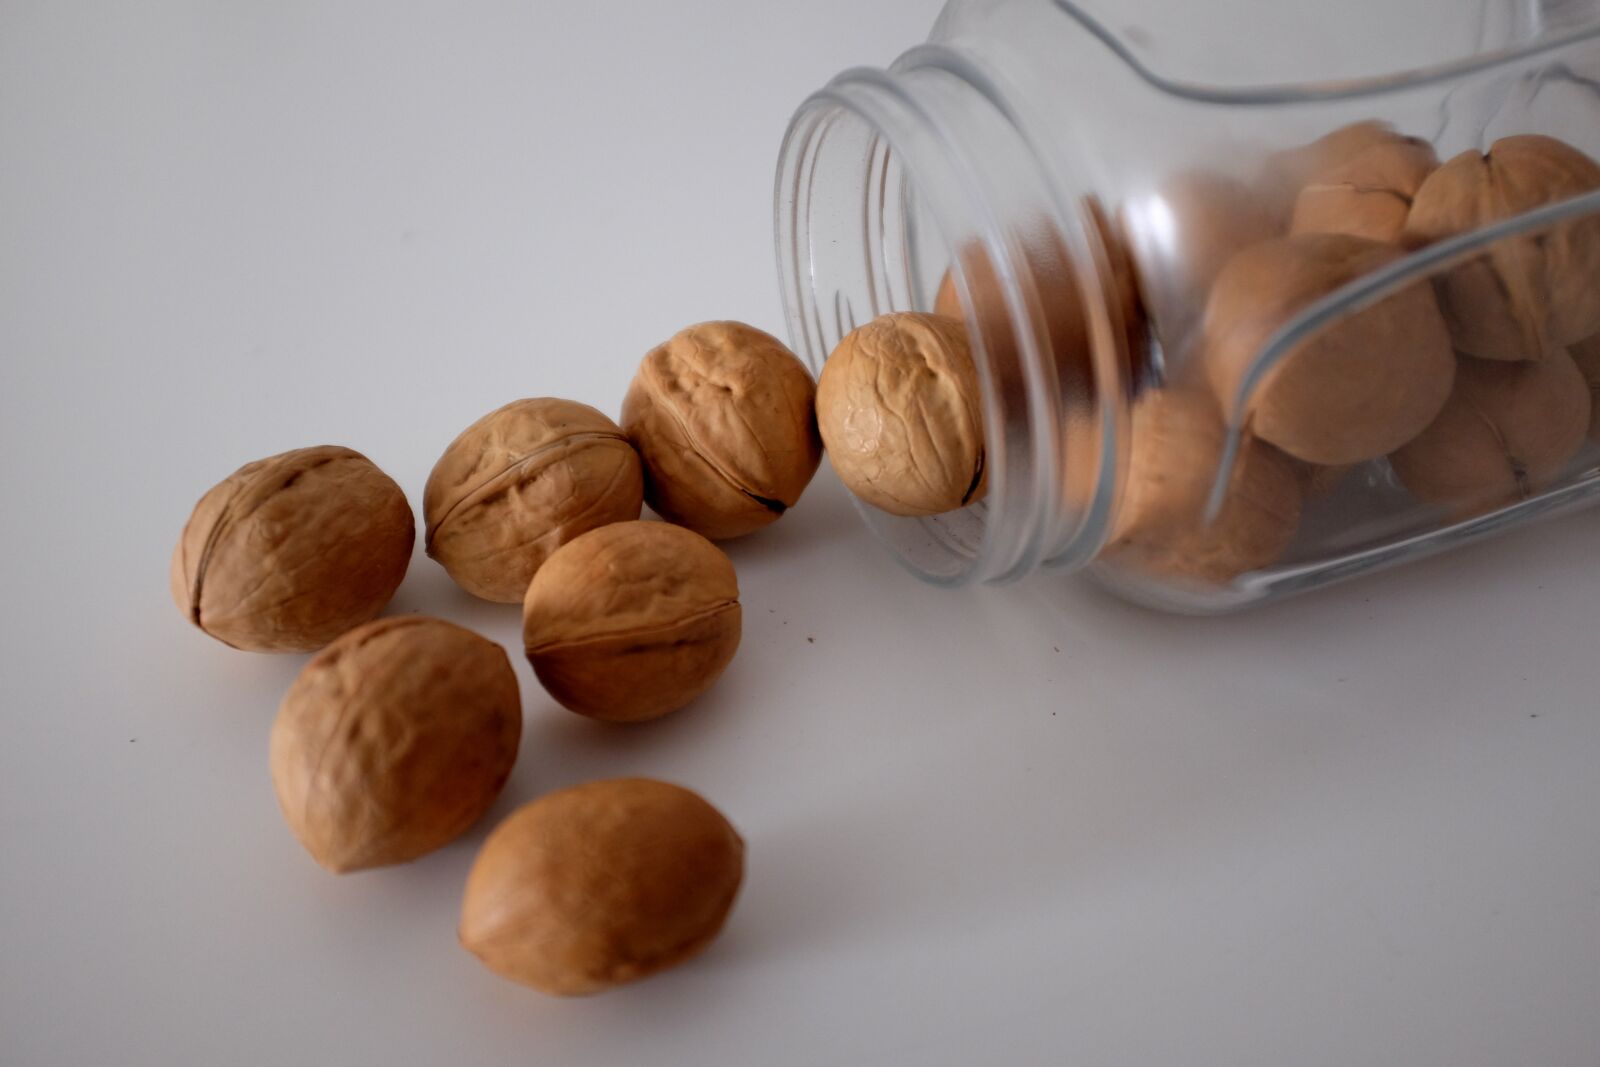 Fujifilm X100T sample photo. Nuts, food, nutrition photography